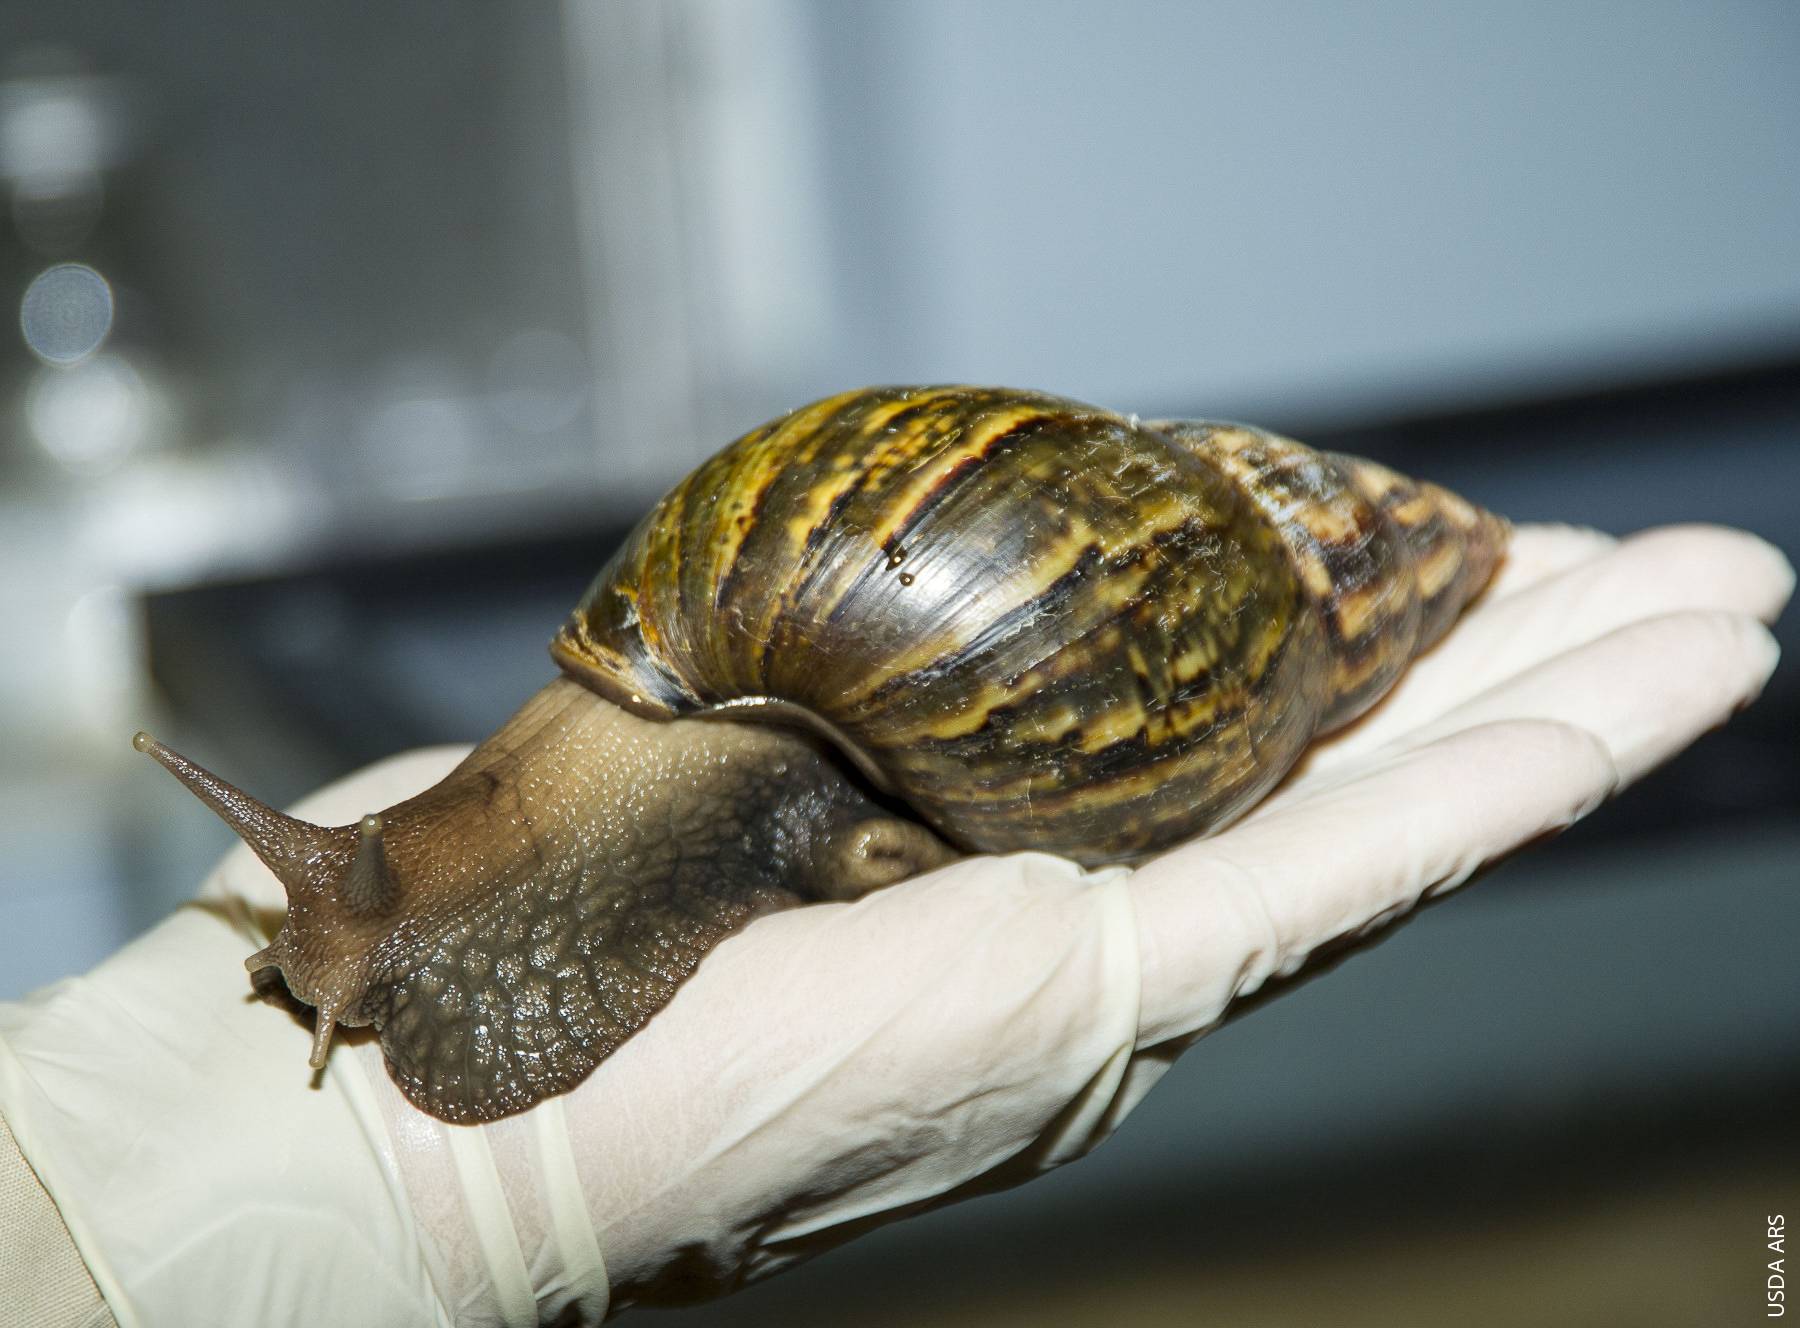 In July 2014, the USDA intercepted a shipment of giant African snails (shown above in an official's hand) in Los Angeles. Although the snails haven't reached the wild in California, UC researchers are working with scientists in Florida, where officials are trying to eradicate an infestation discovered in 2010.